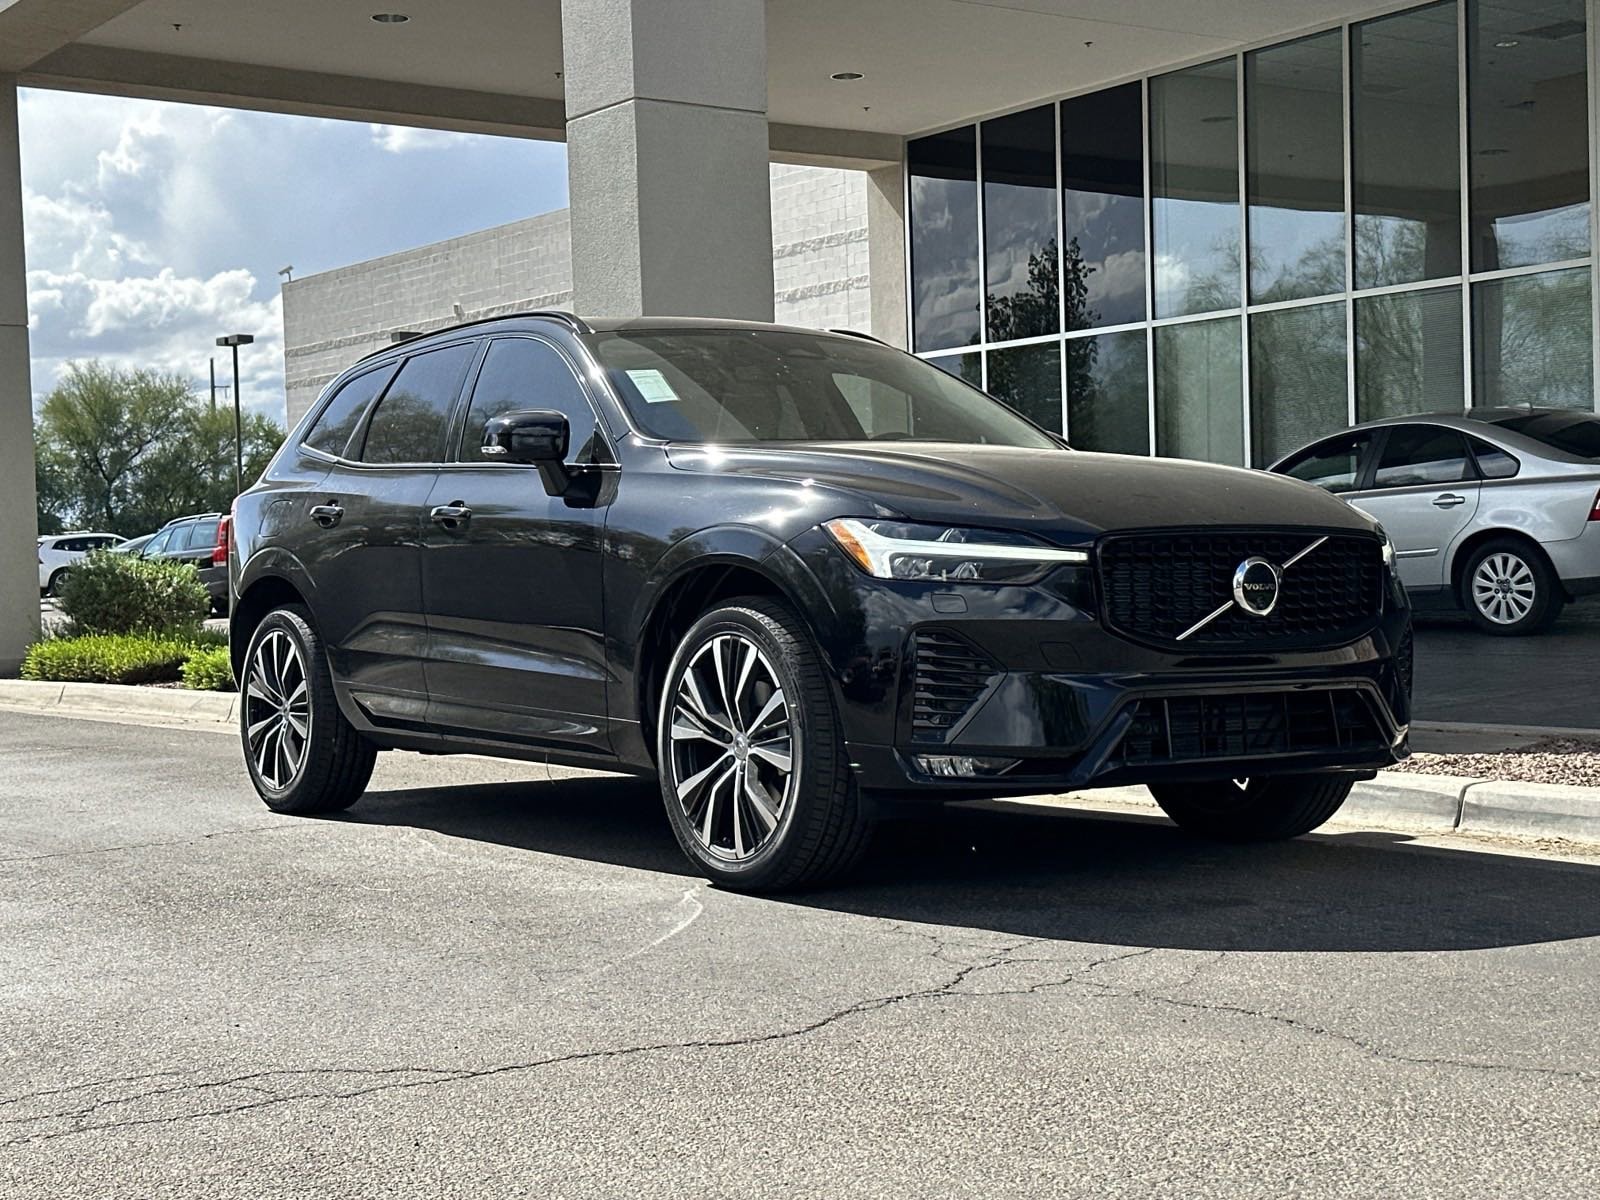 Does the Volvo XC60 have Apple CarPlay and other frequently asked